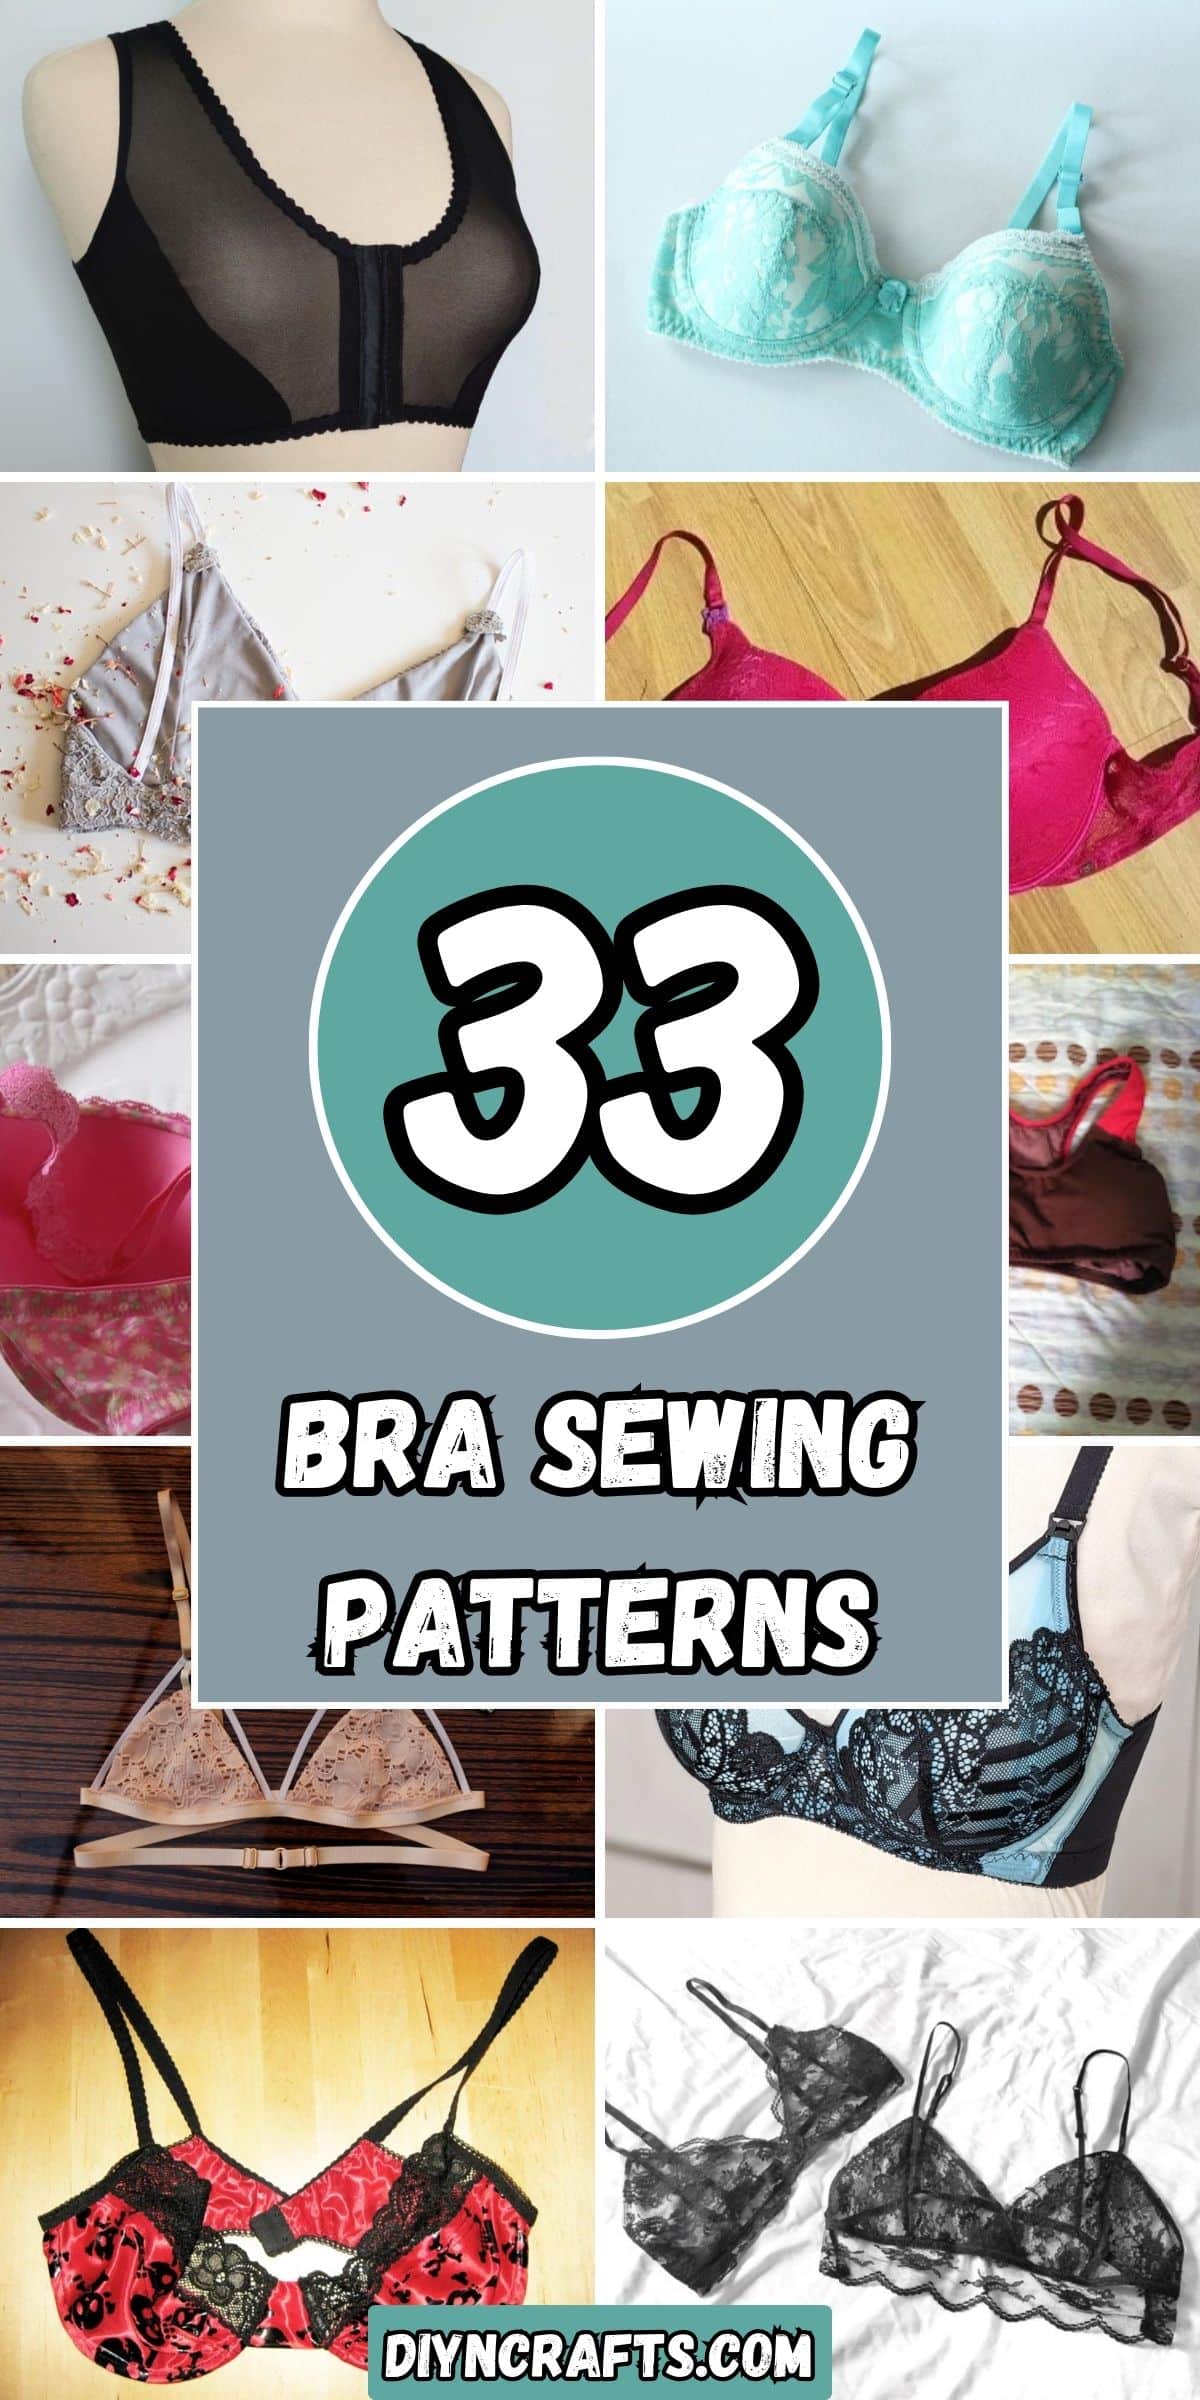 33 Bra Sewing Patterns (Lots of Styles) - DIY & Crafts